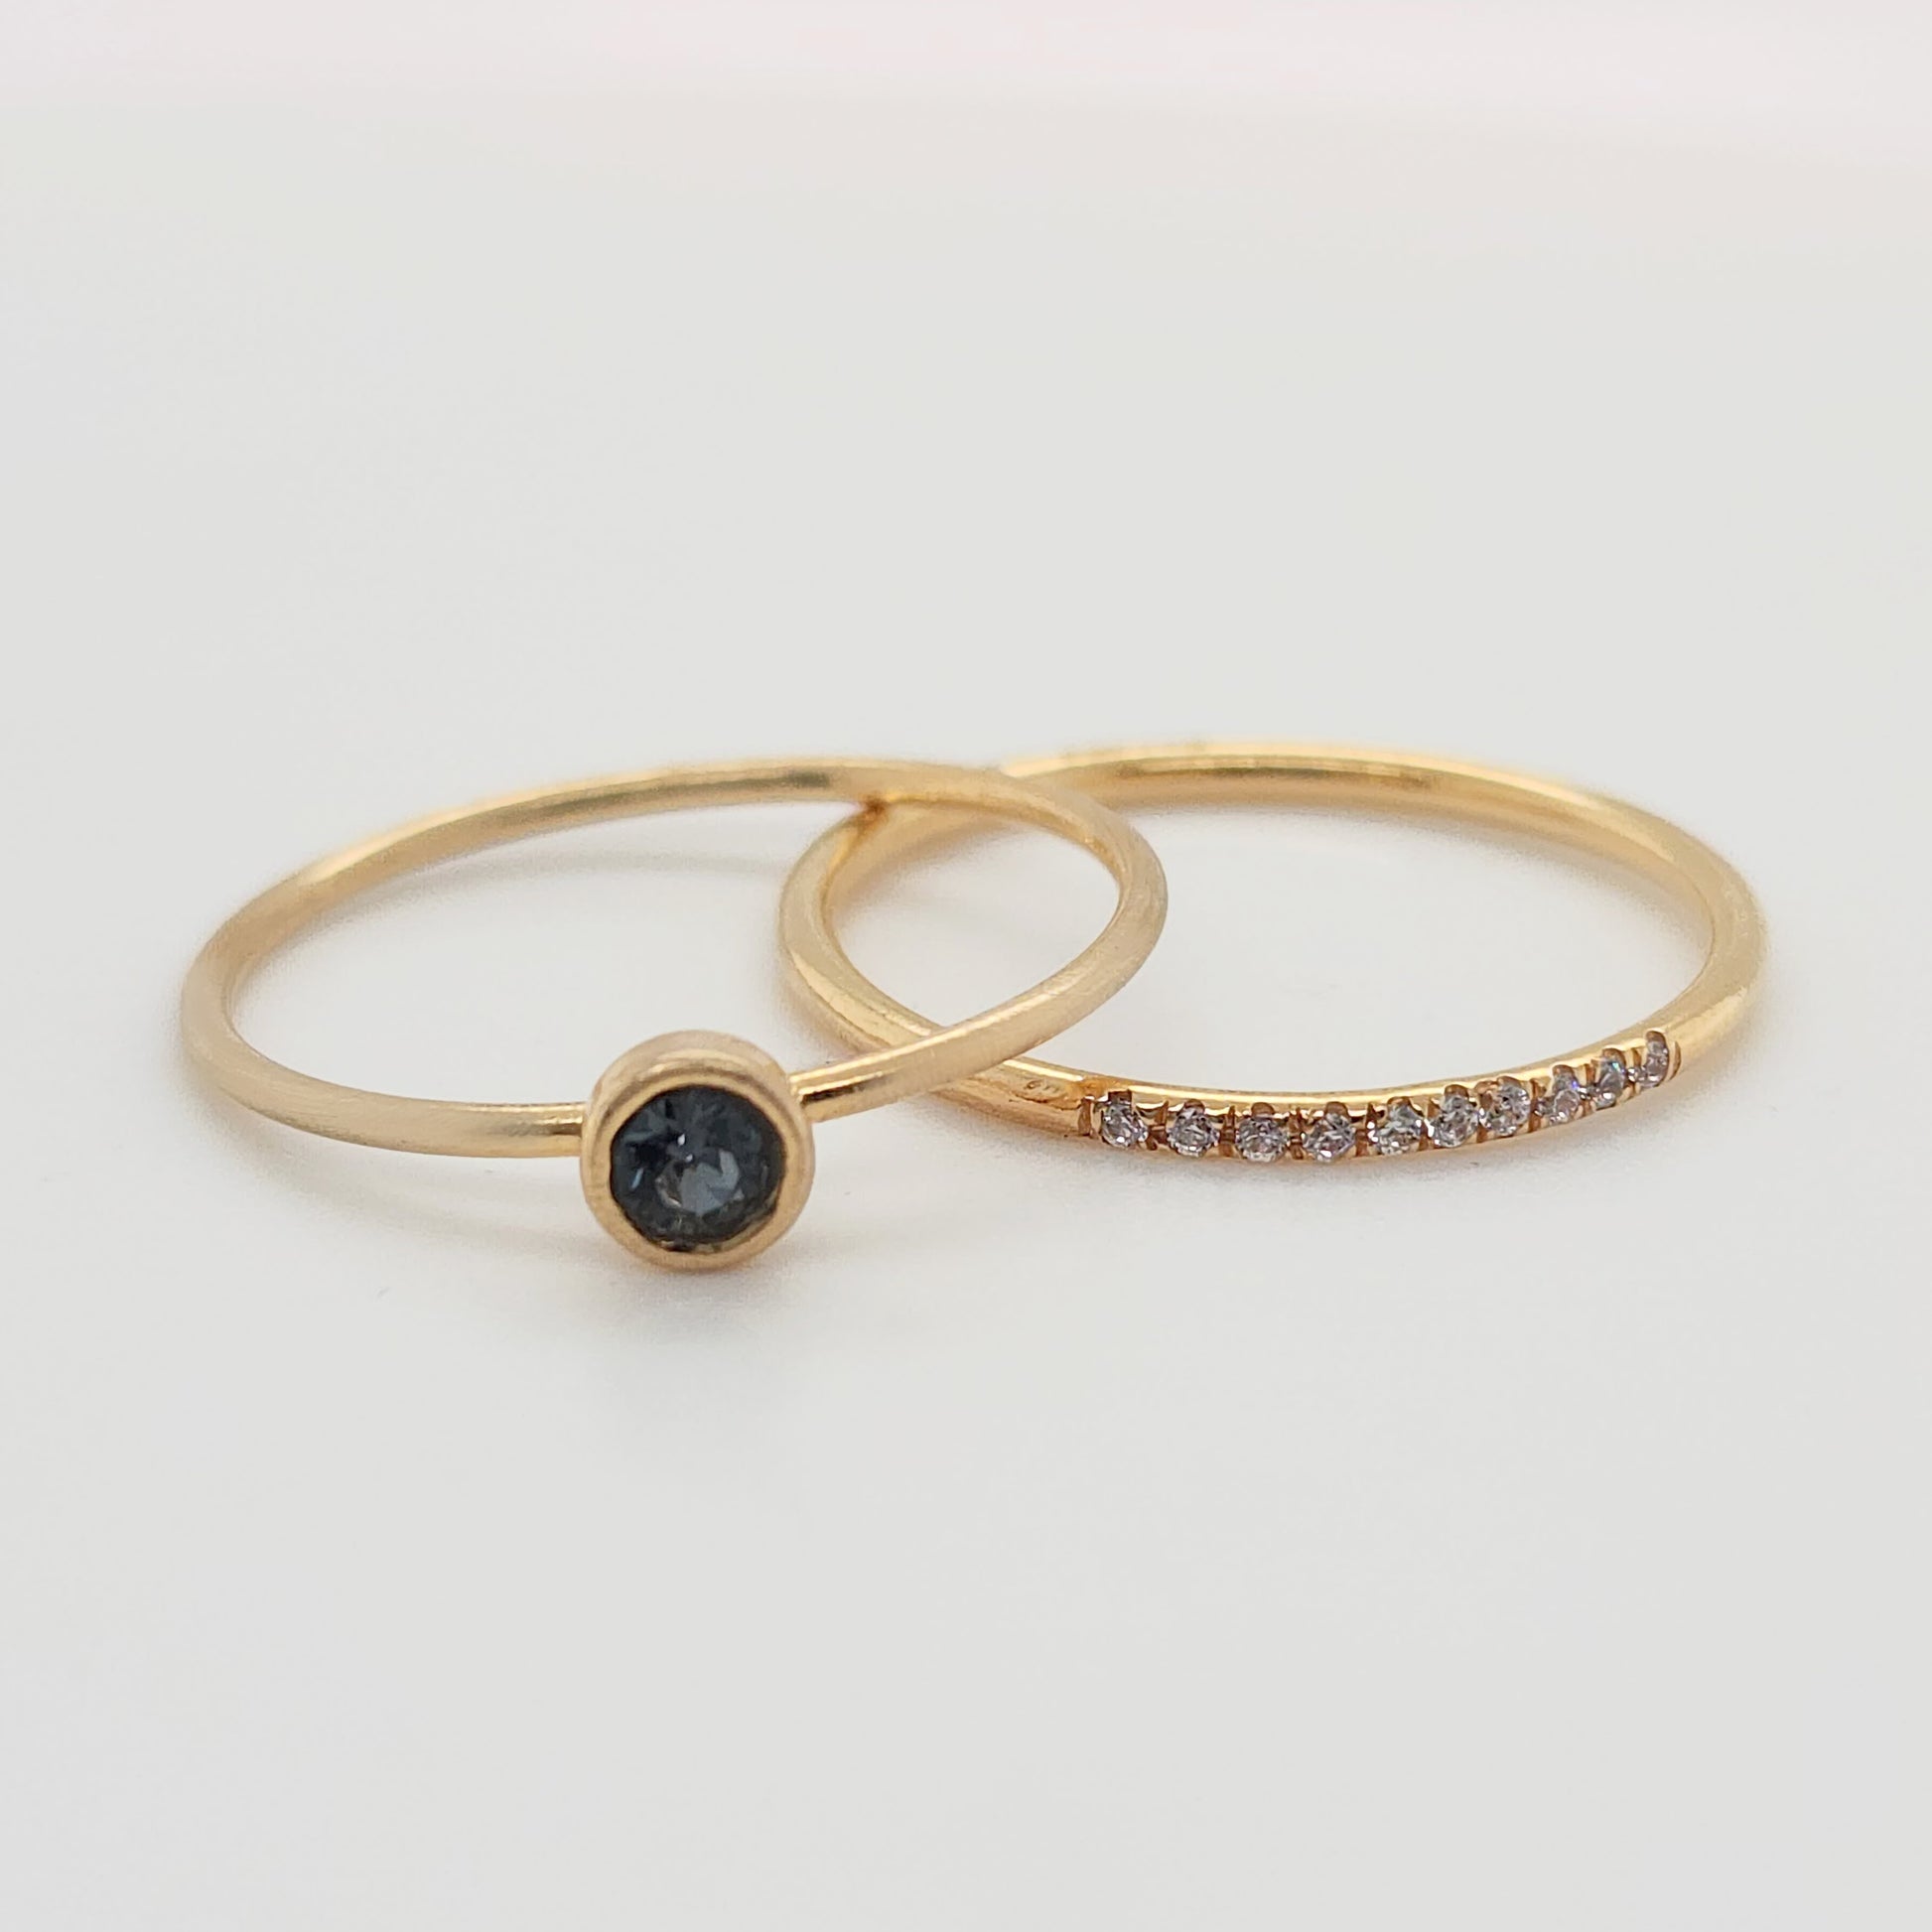 Large Dark Charcoal Ring - Going Golden